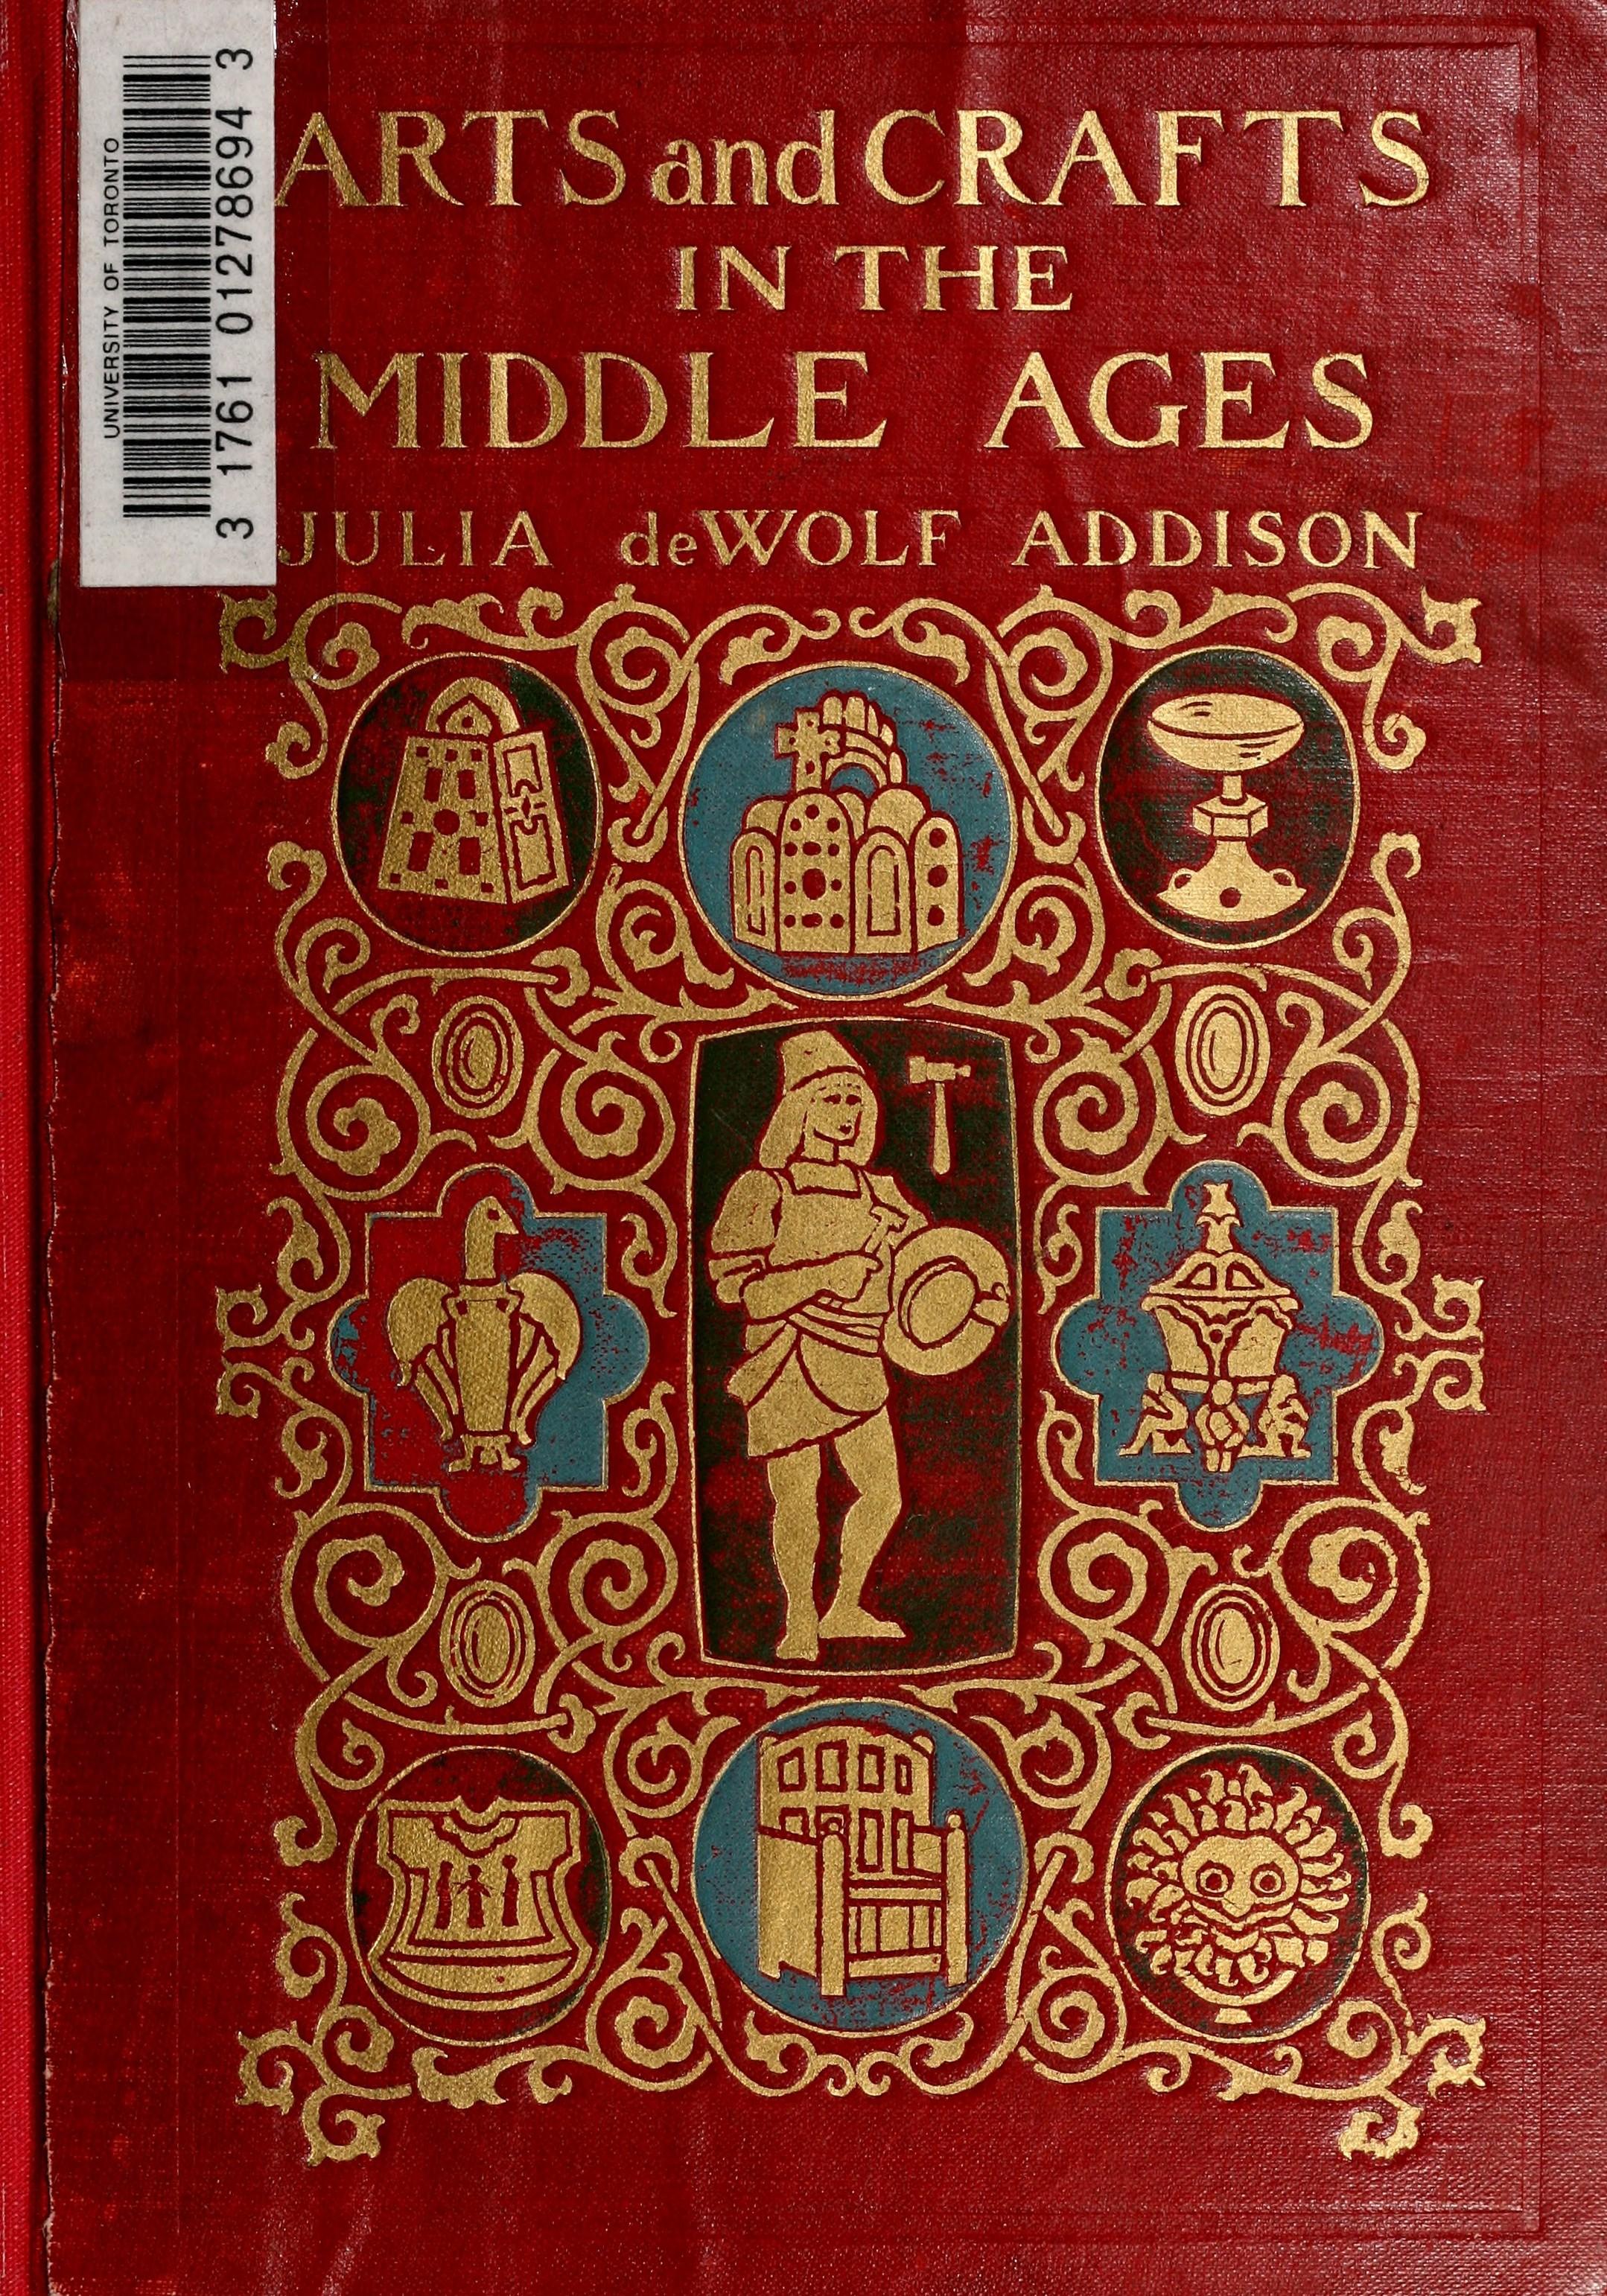 Arts and Crafts in Middle Ages : A Description of Mediaeval Workmanship in Several of the Departments of Applied Art, Together with Some Account of Special Artisans in the Early Renaissance / by Julia de Wolf Addison